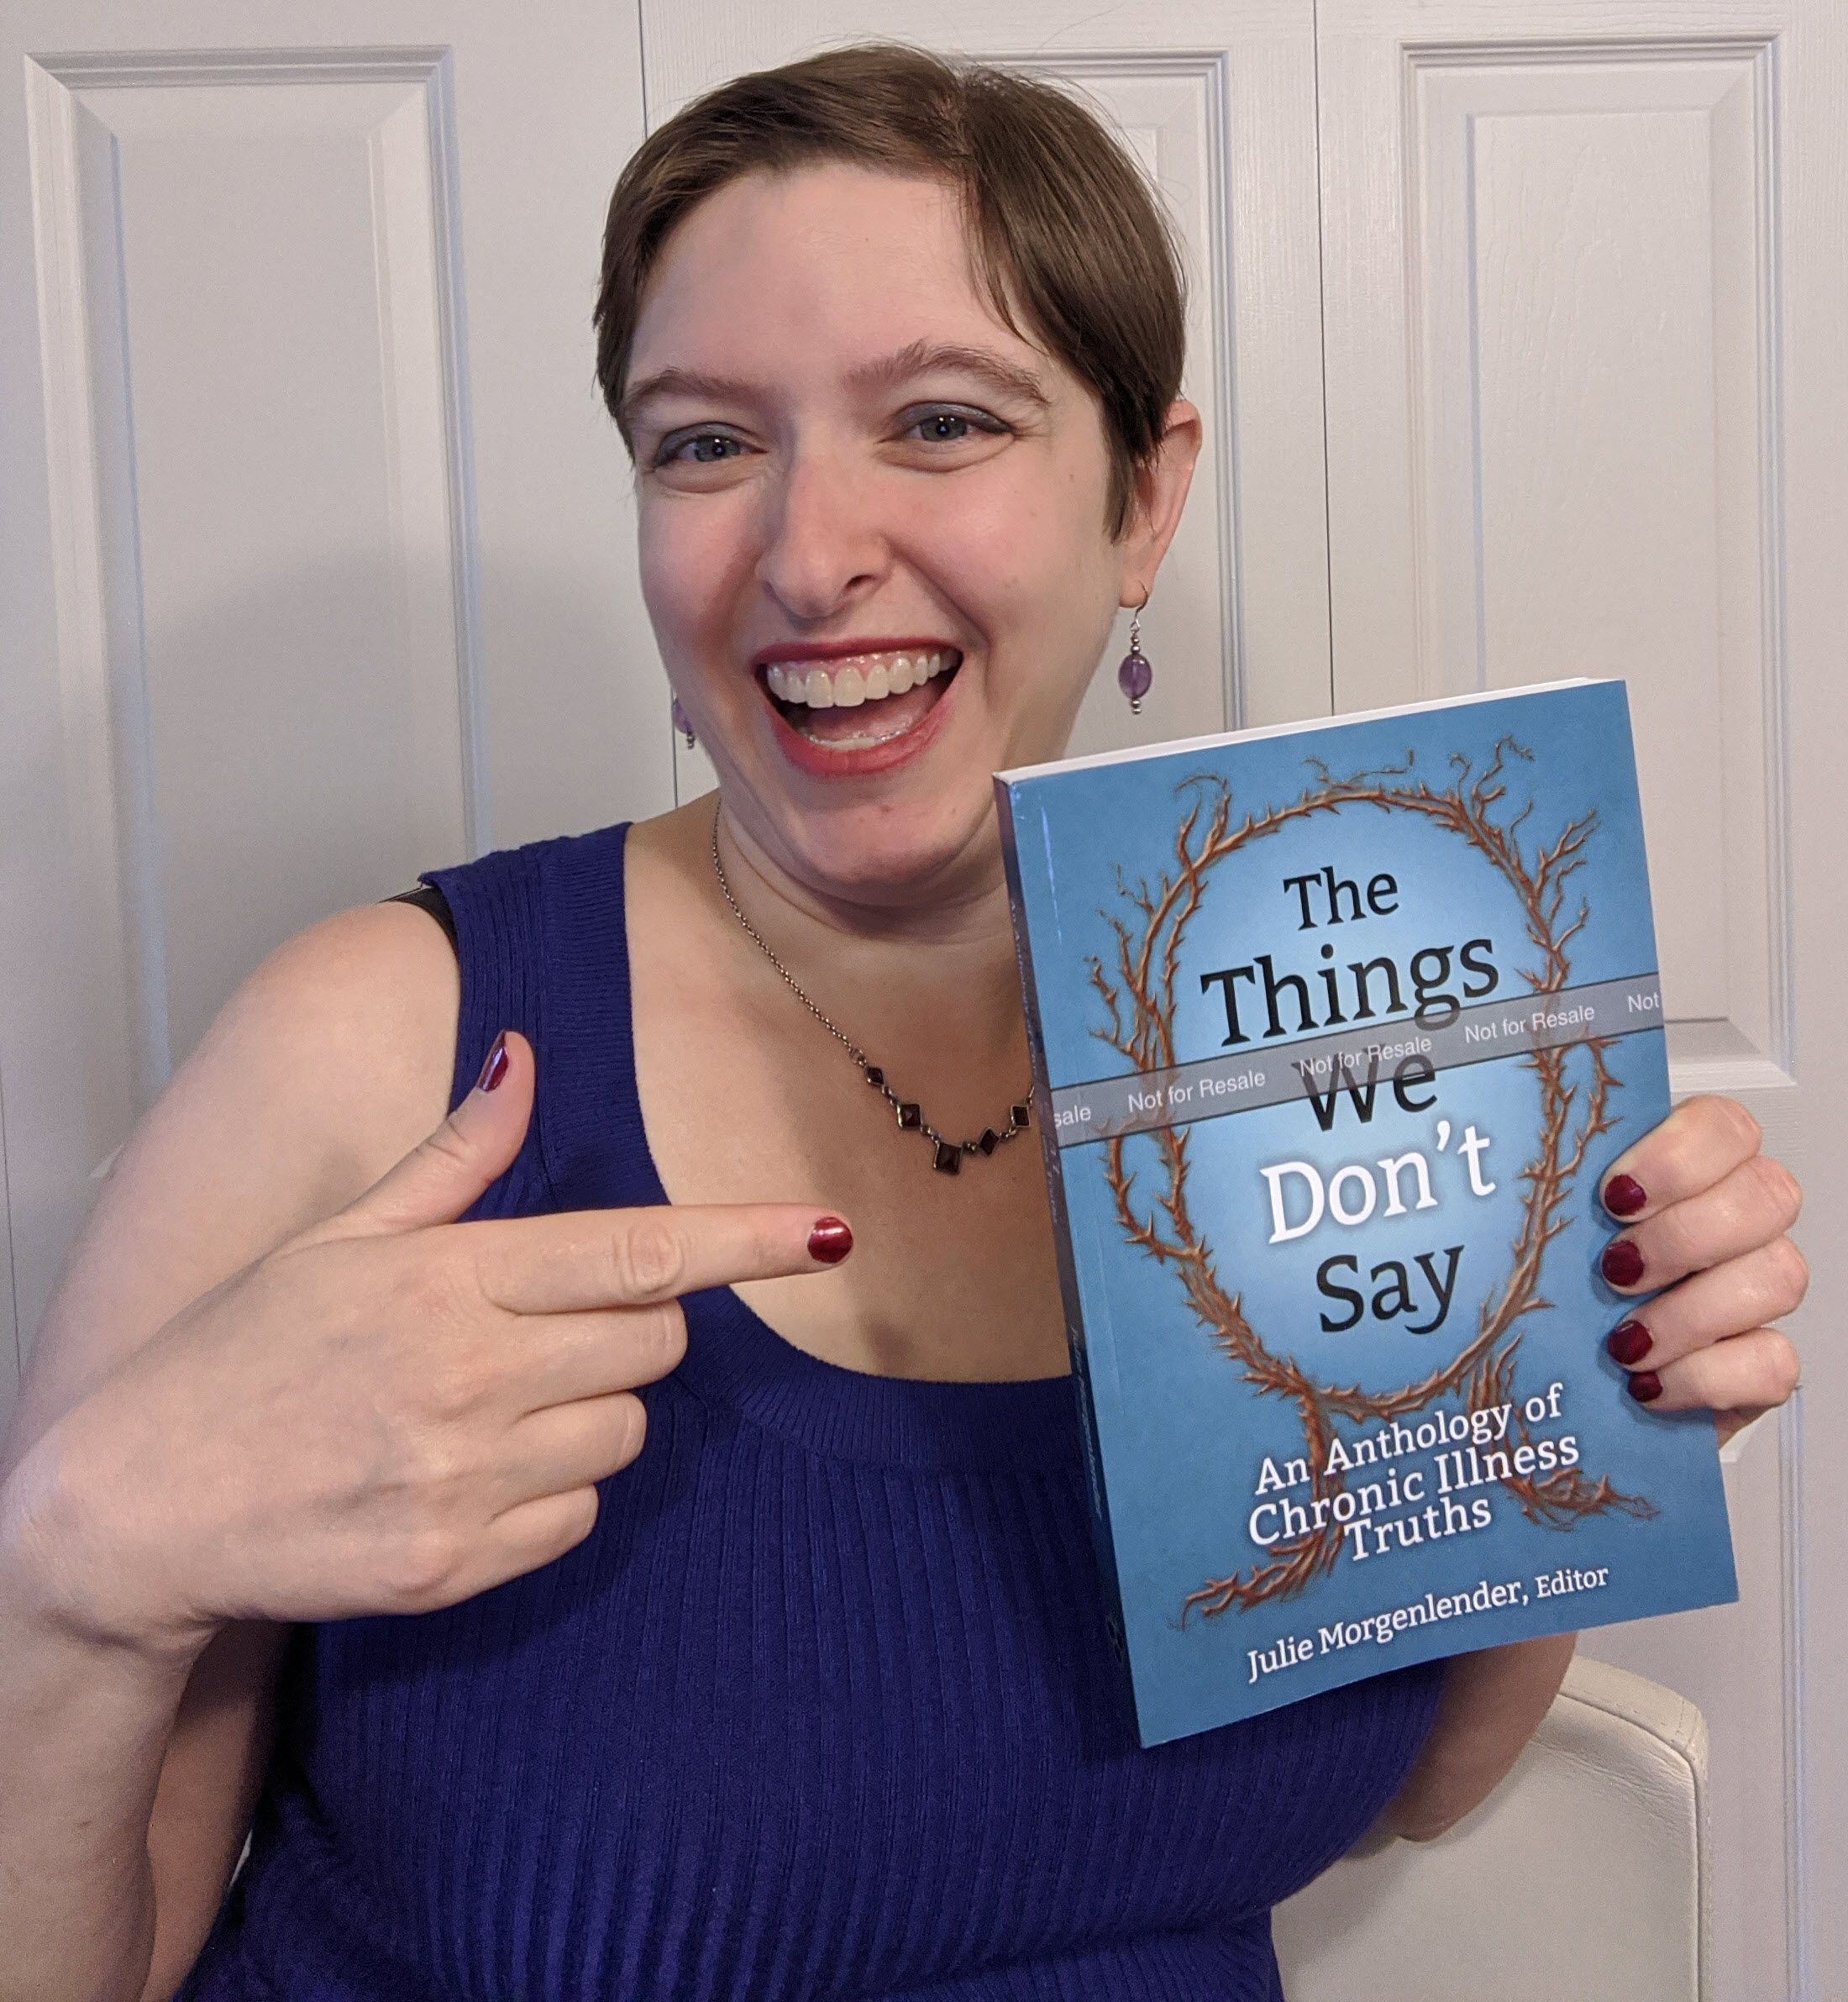 White woman with brown hair and blue shirt pointing with right hand at book in left hand with blue cover and title The Things We Don't Say: An Anthology of Chronic Illness Truths